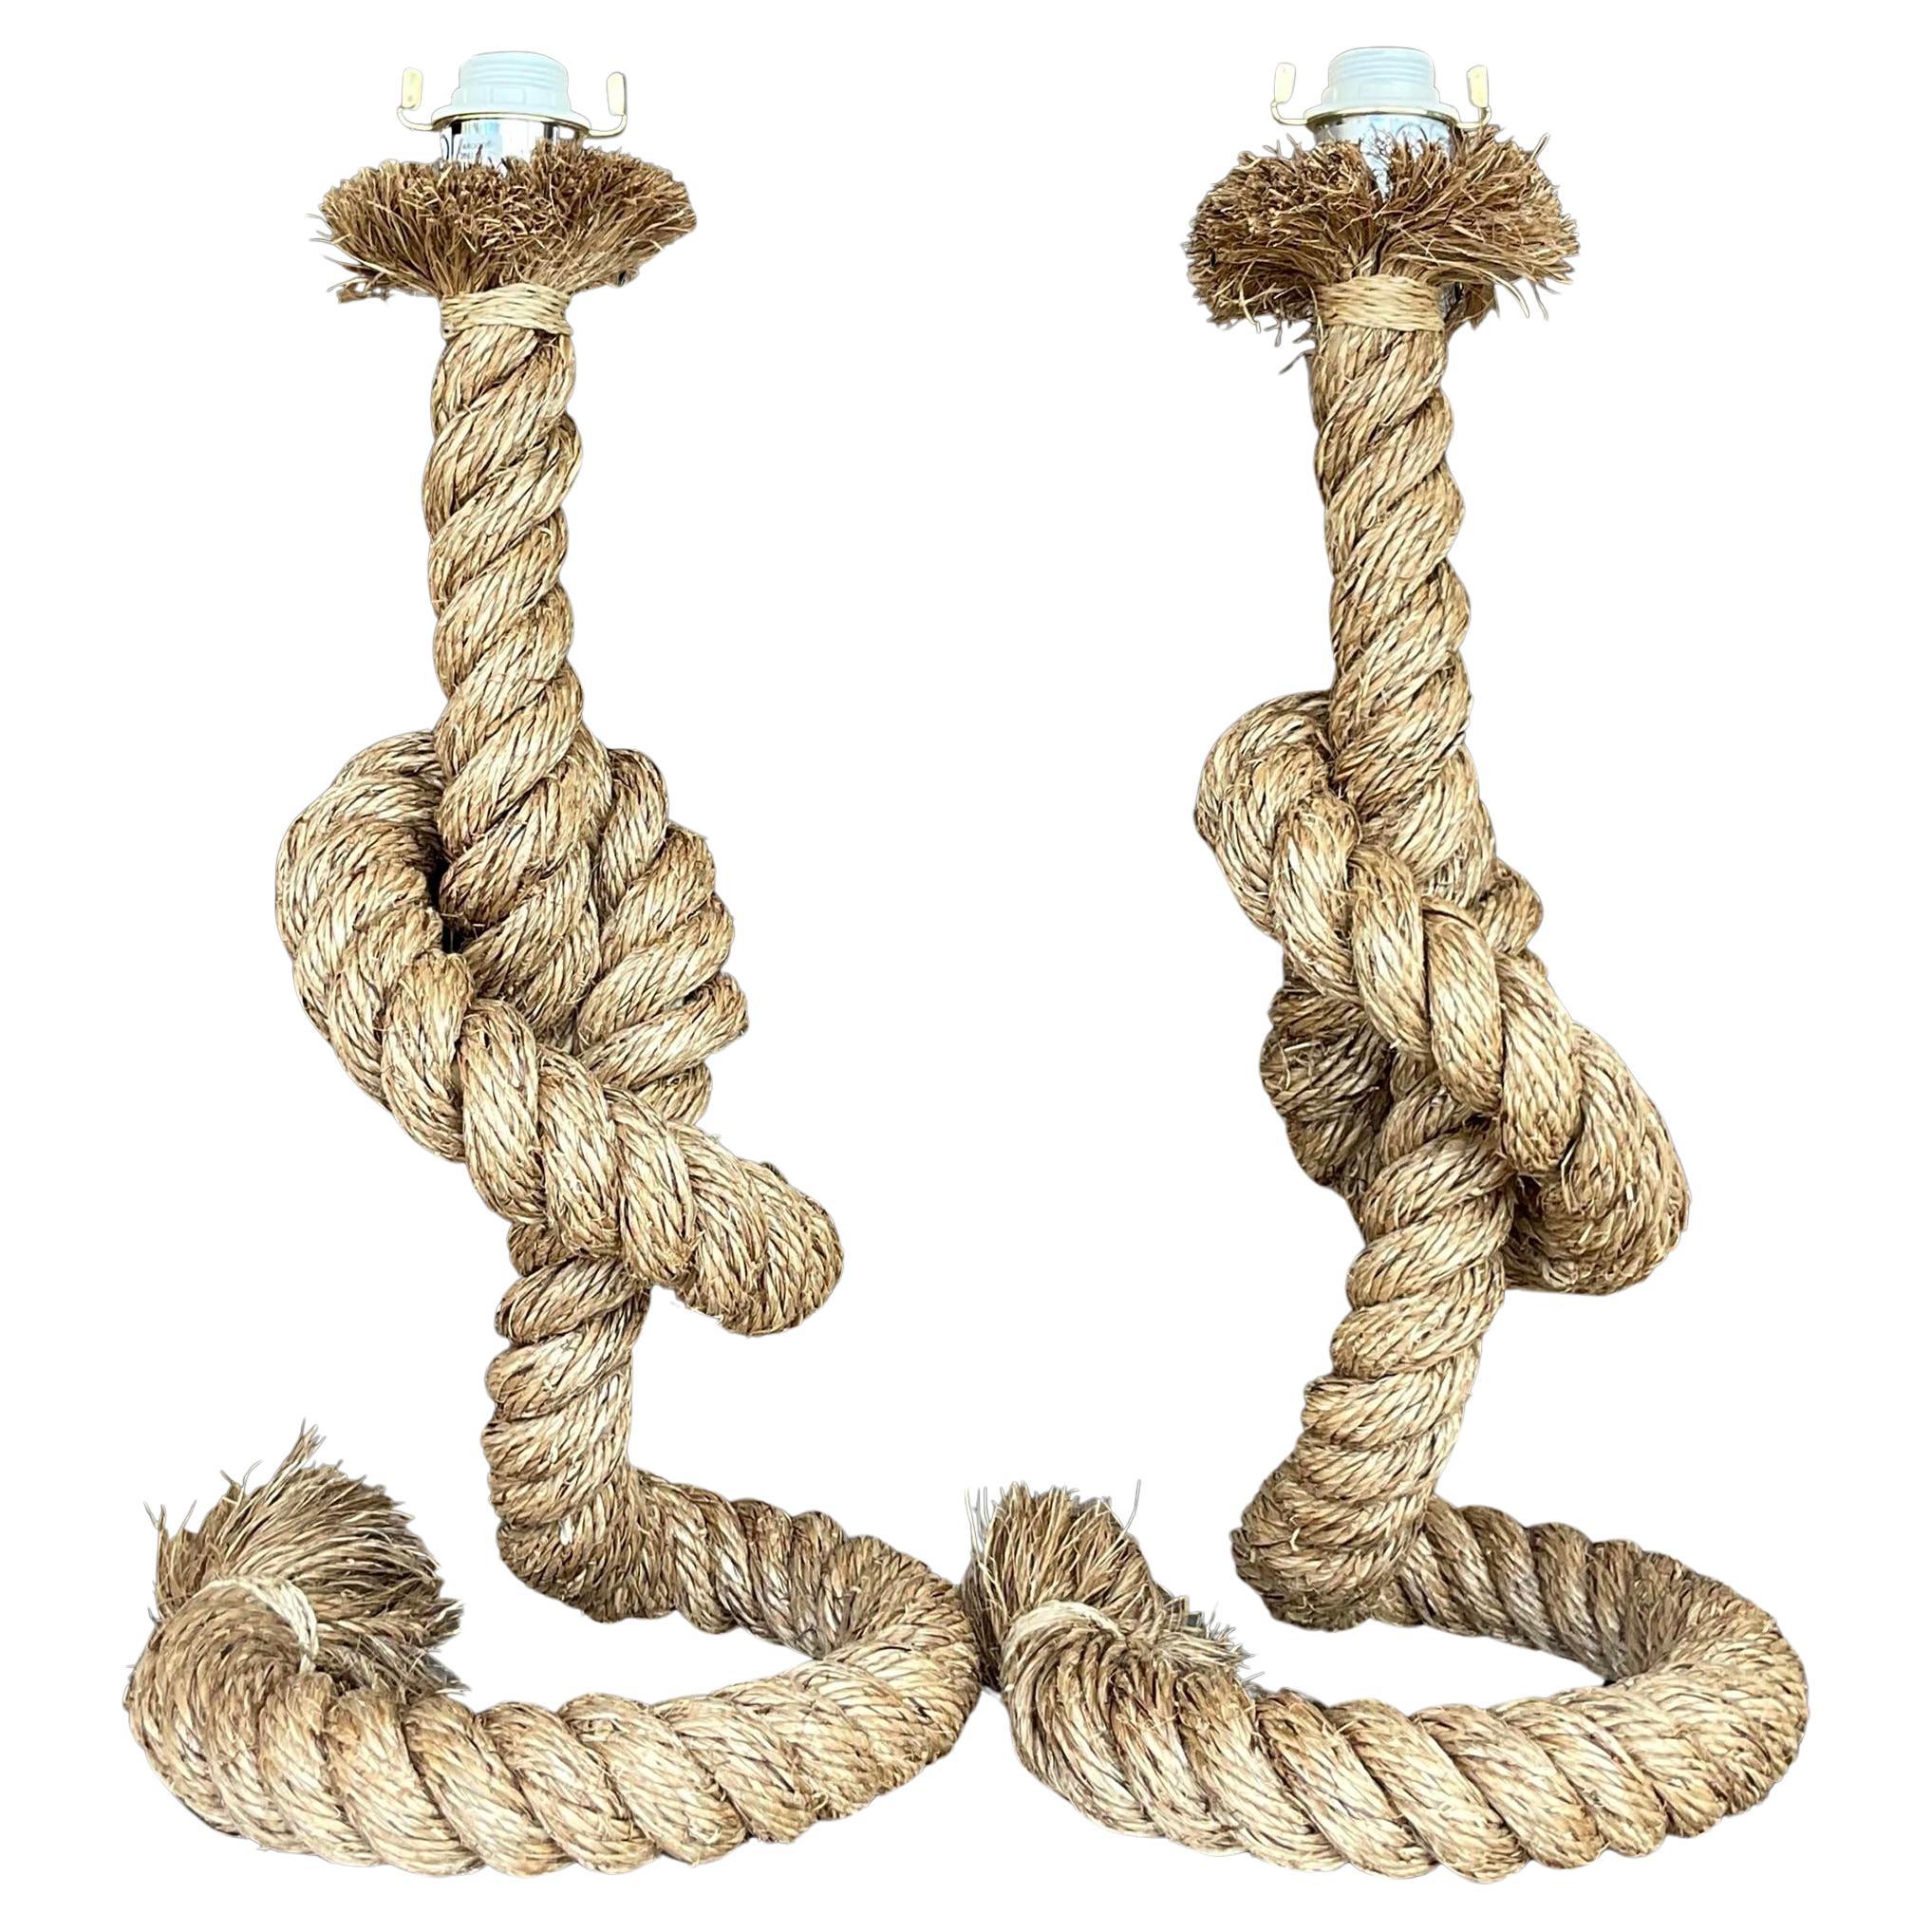 Vintage Coastal Twisted Rope Table Lamps - a Pair